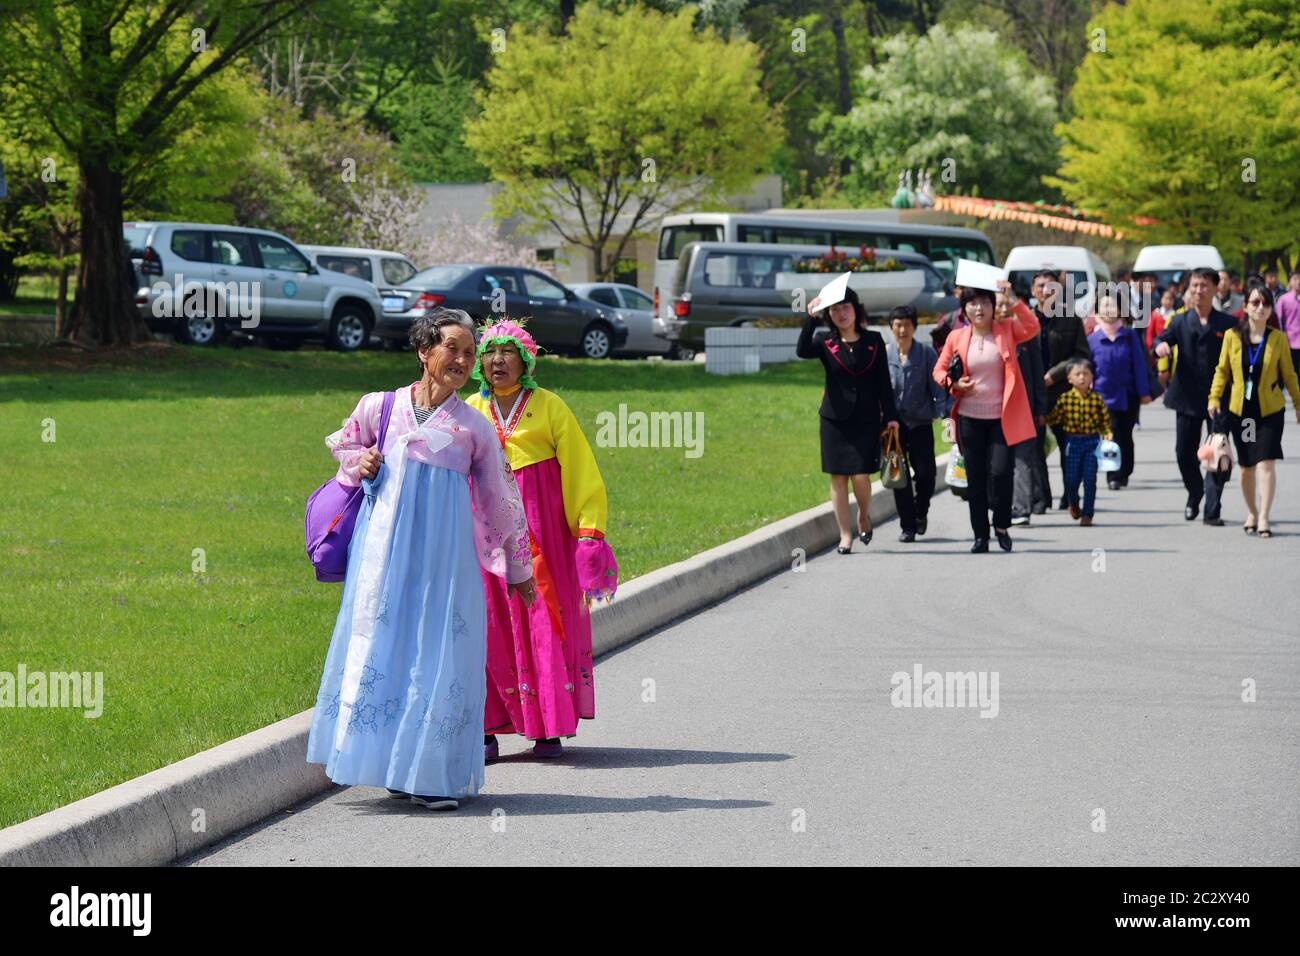 Pyongyang, North Korea - May 1, 2019: Two old women in traditional korean Hanbok dress and another locals walking in the Taesongsan Funfair. Is an amu Stock Photo